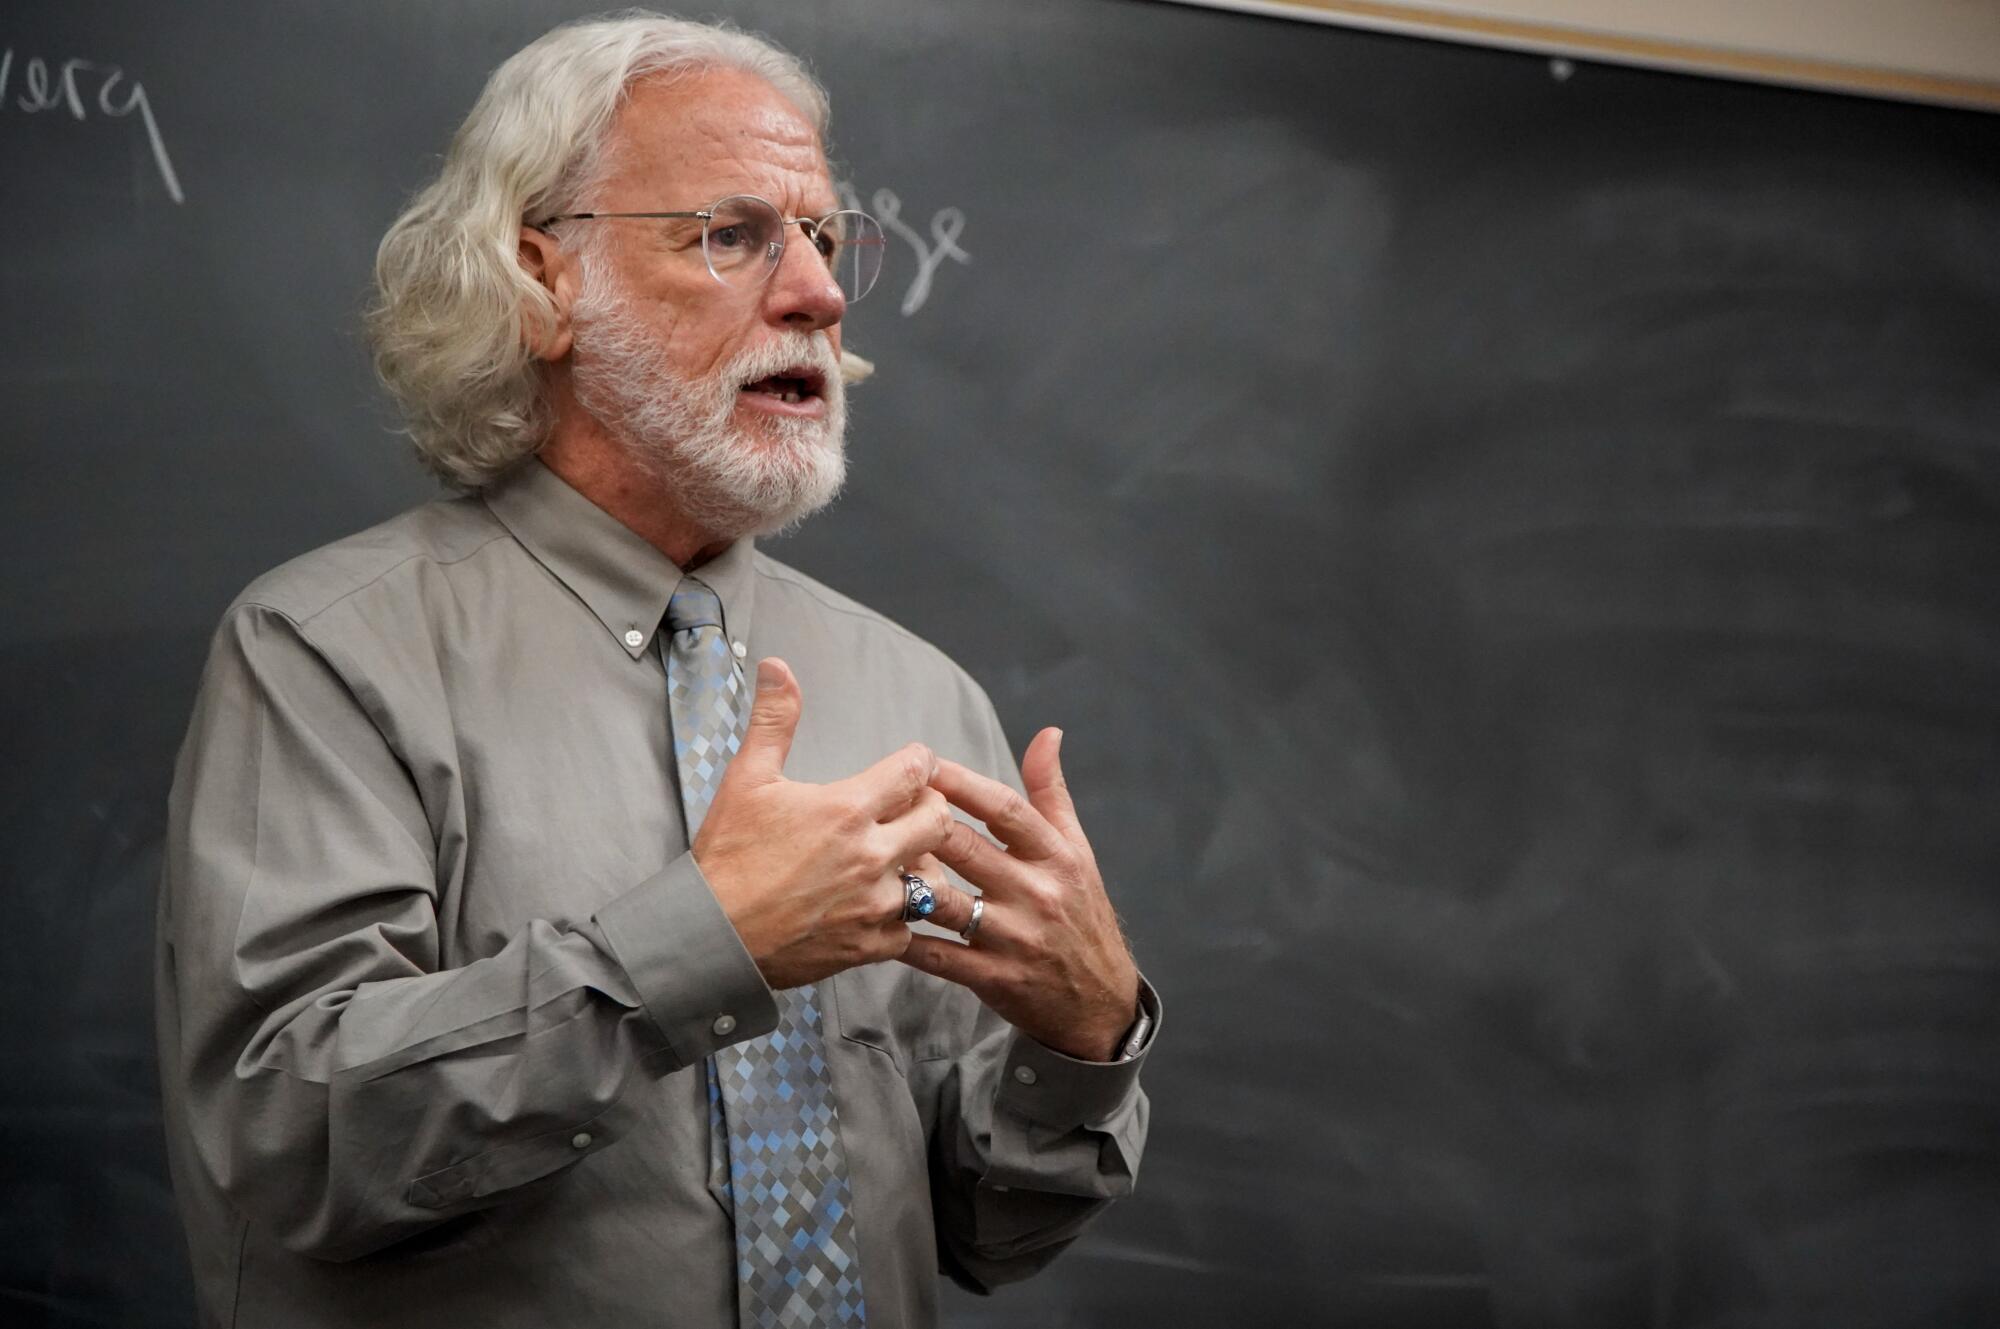 A man with long white hair and beard and wearing glasses stands in front of a chalkboard, gesturing.